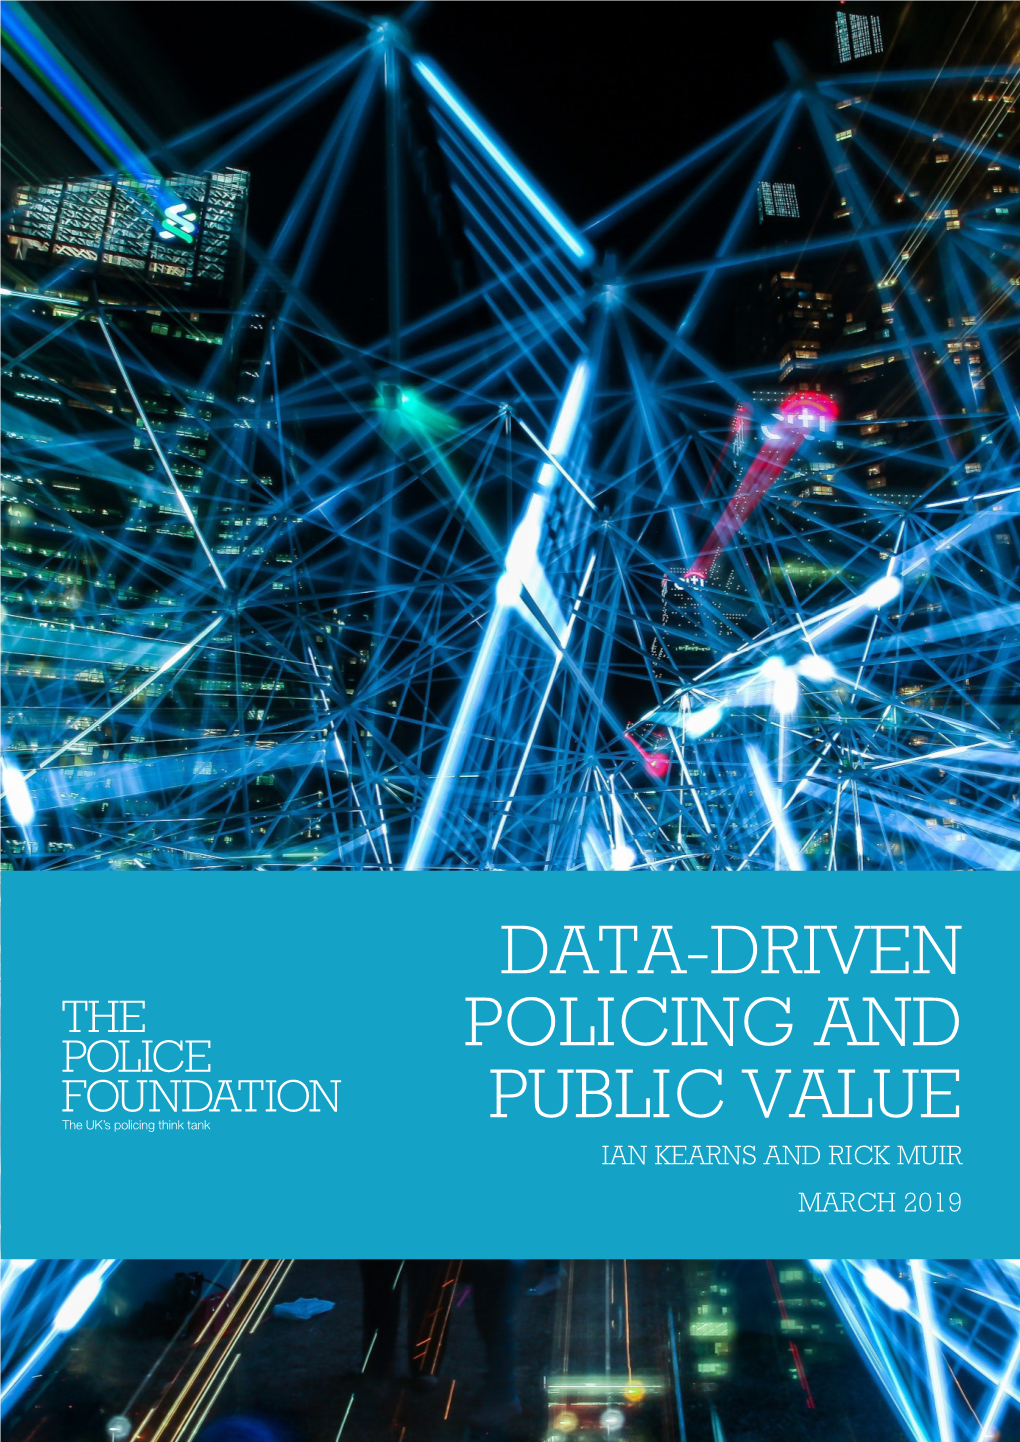 Data-Driven Policing and Public Value Ian Kearns and Rick Muir March 2019 Data-Driven Policing and Public Value